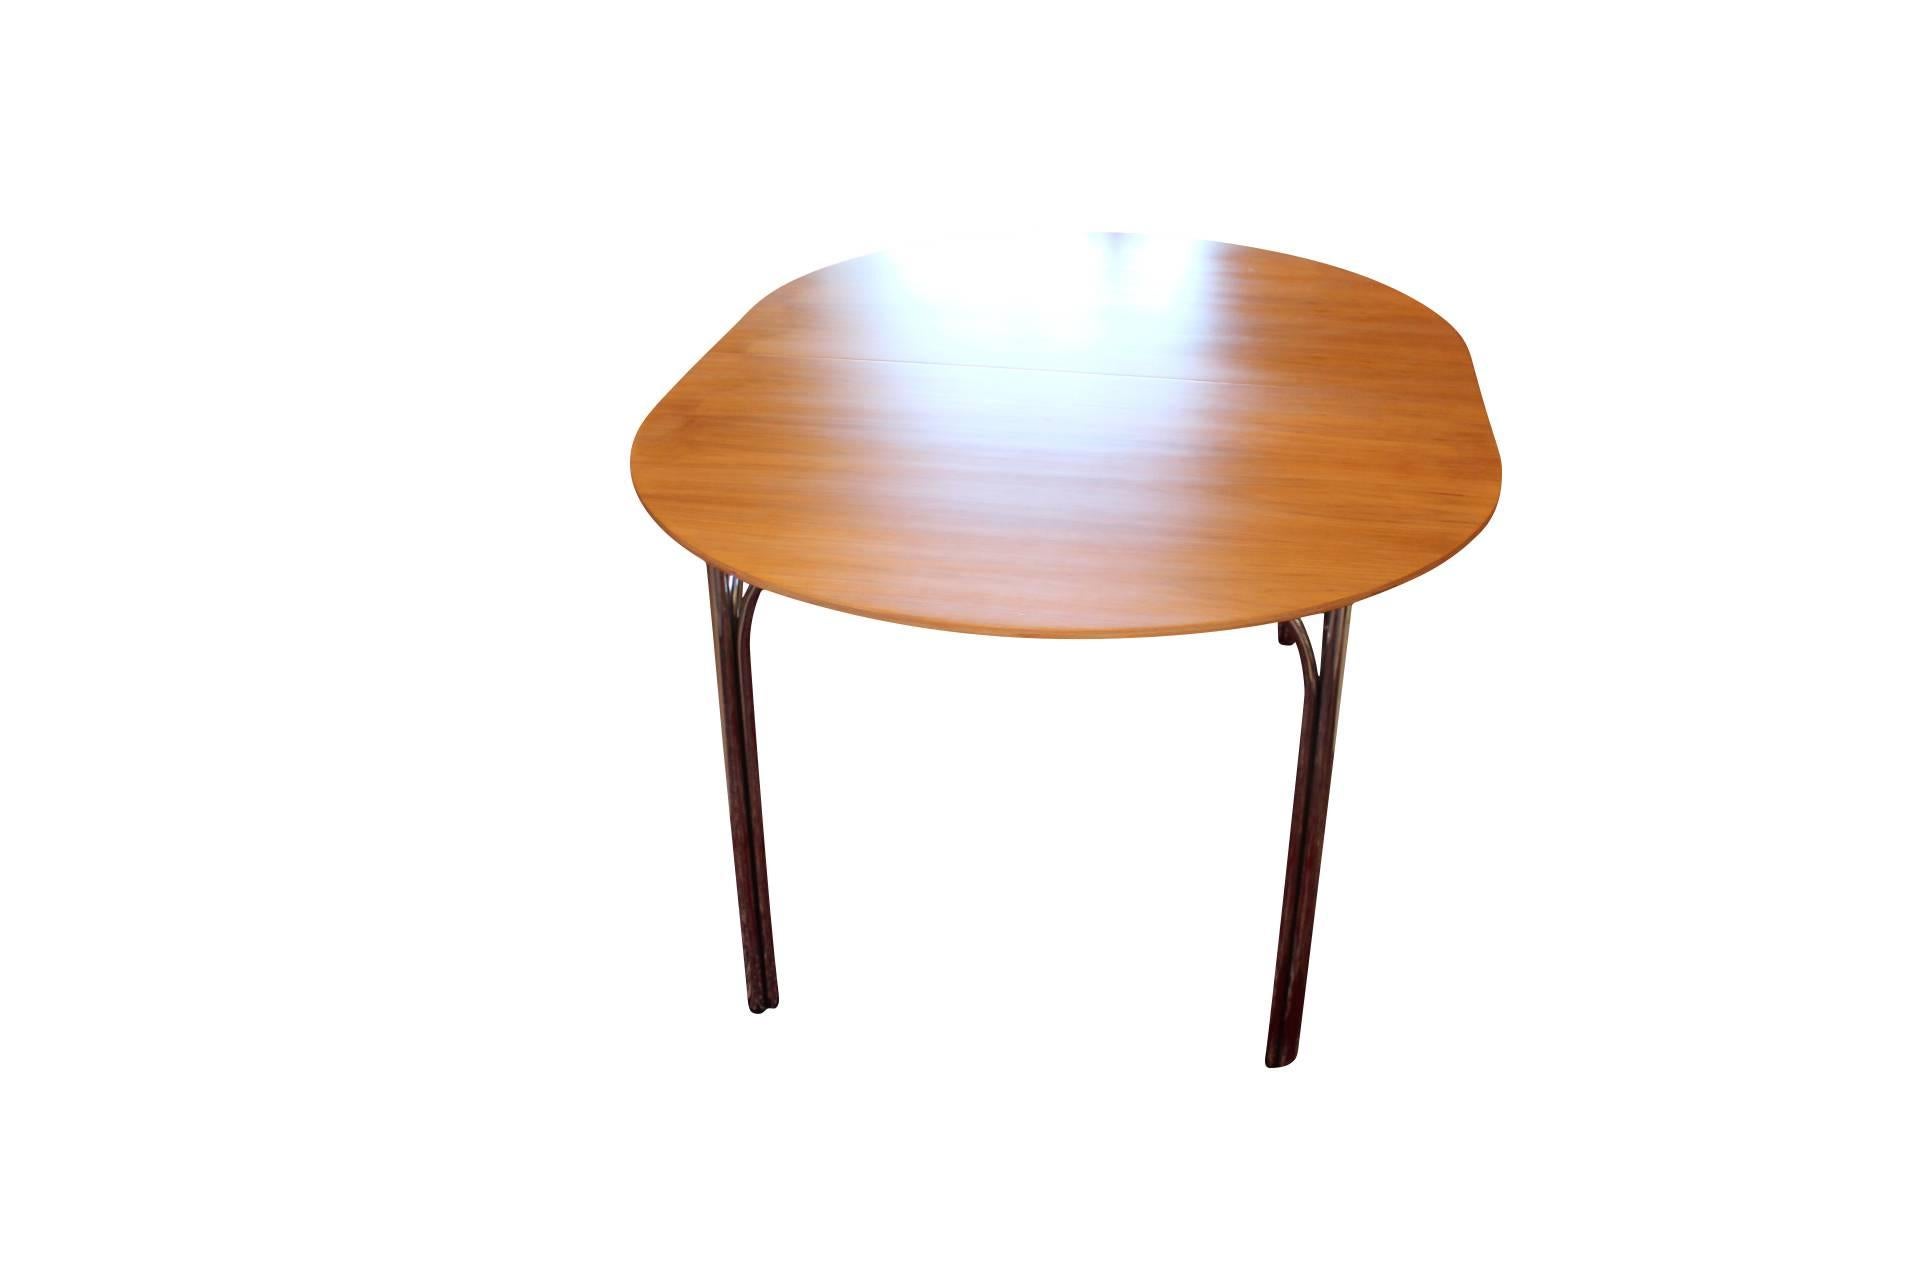 Tobago dining table, model 8311, designed by Nanna Ditzel in 1993 and manufactured by Fredericia Furniture. The table comes with two extension leaves. 

If you would like more pictures, please don't hesitate to ask!